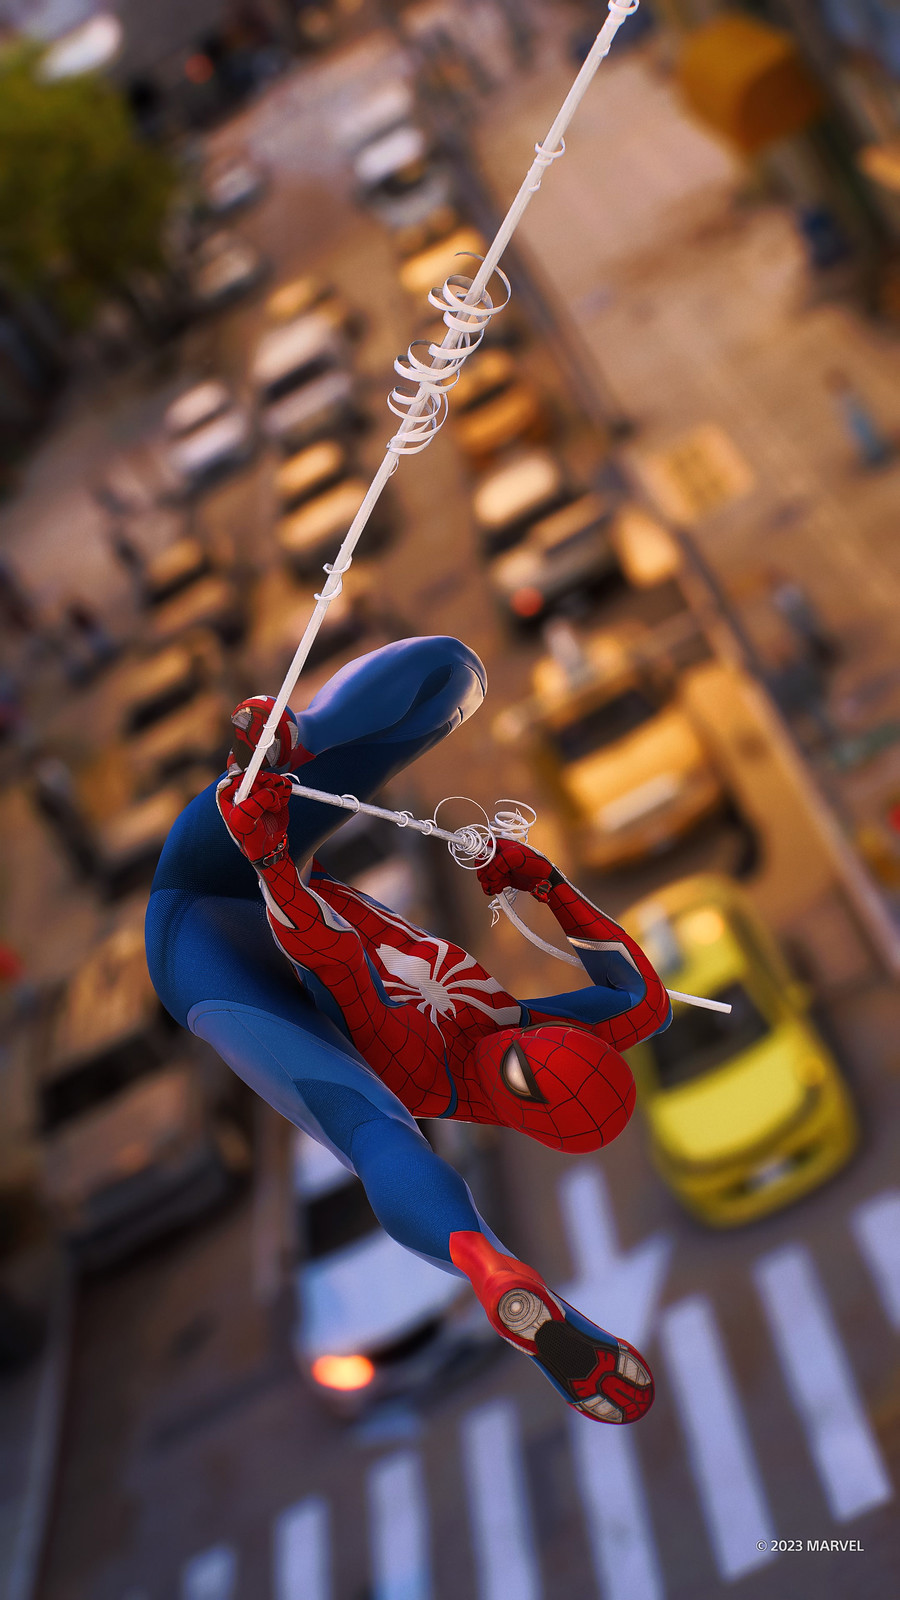 Spider-Man Mod Adds Wolverine to the Game